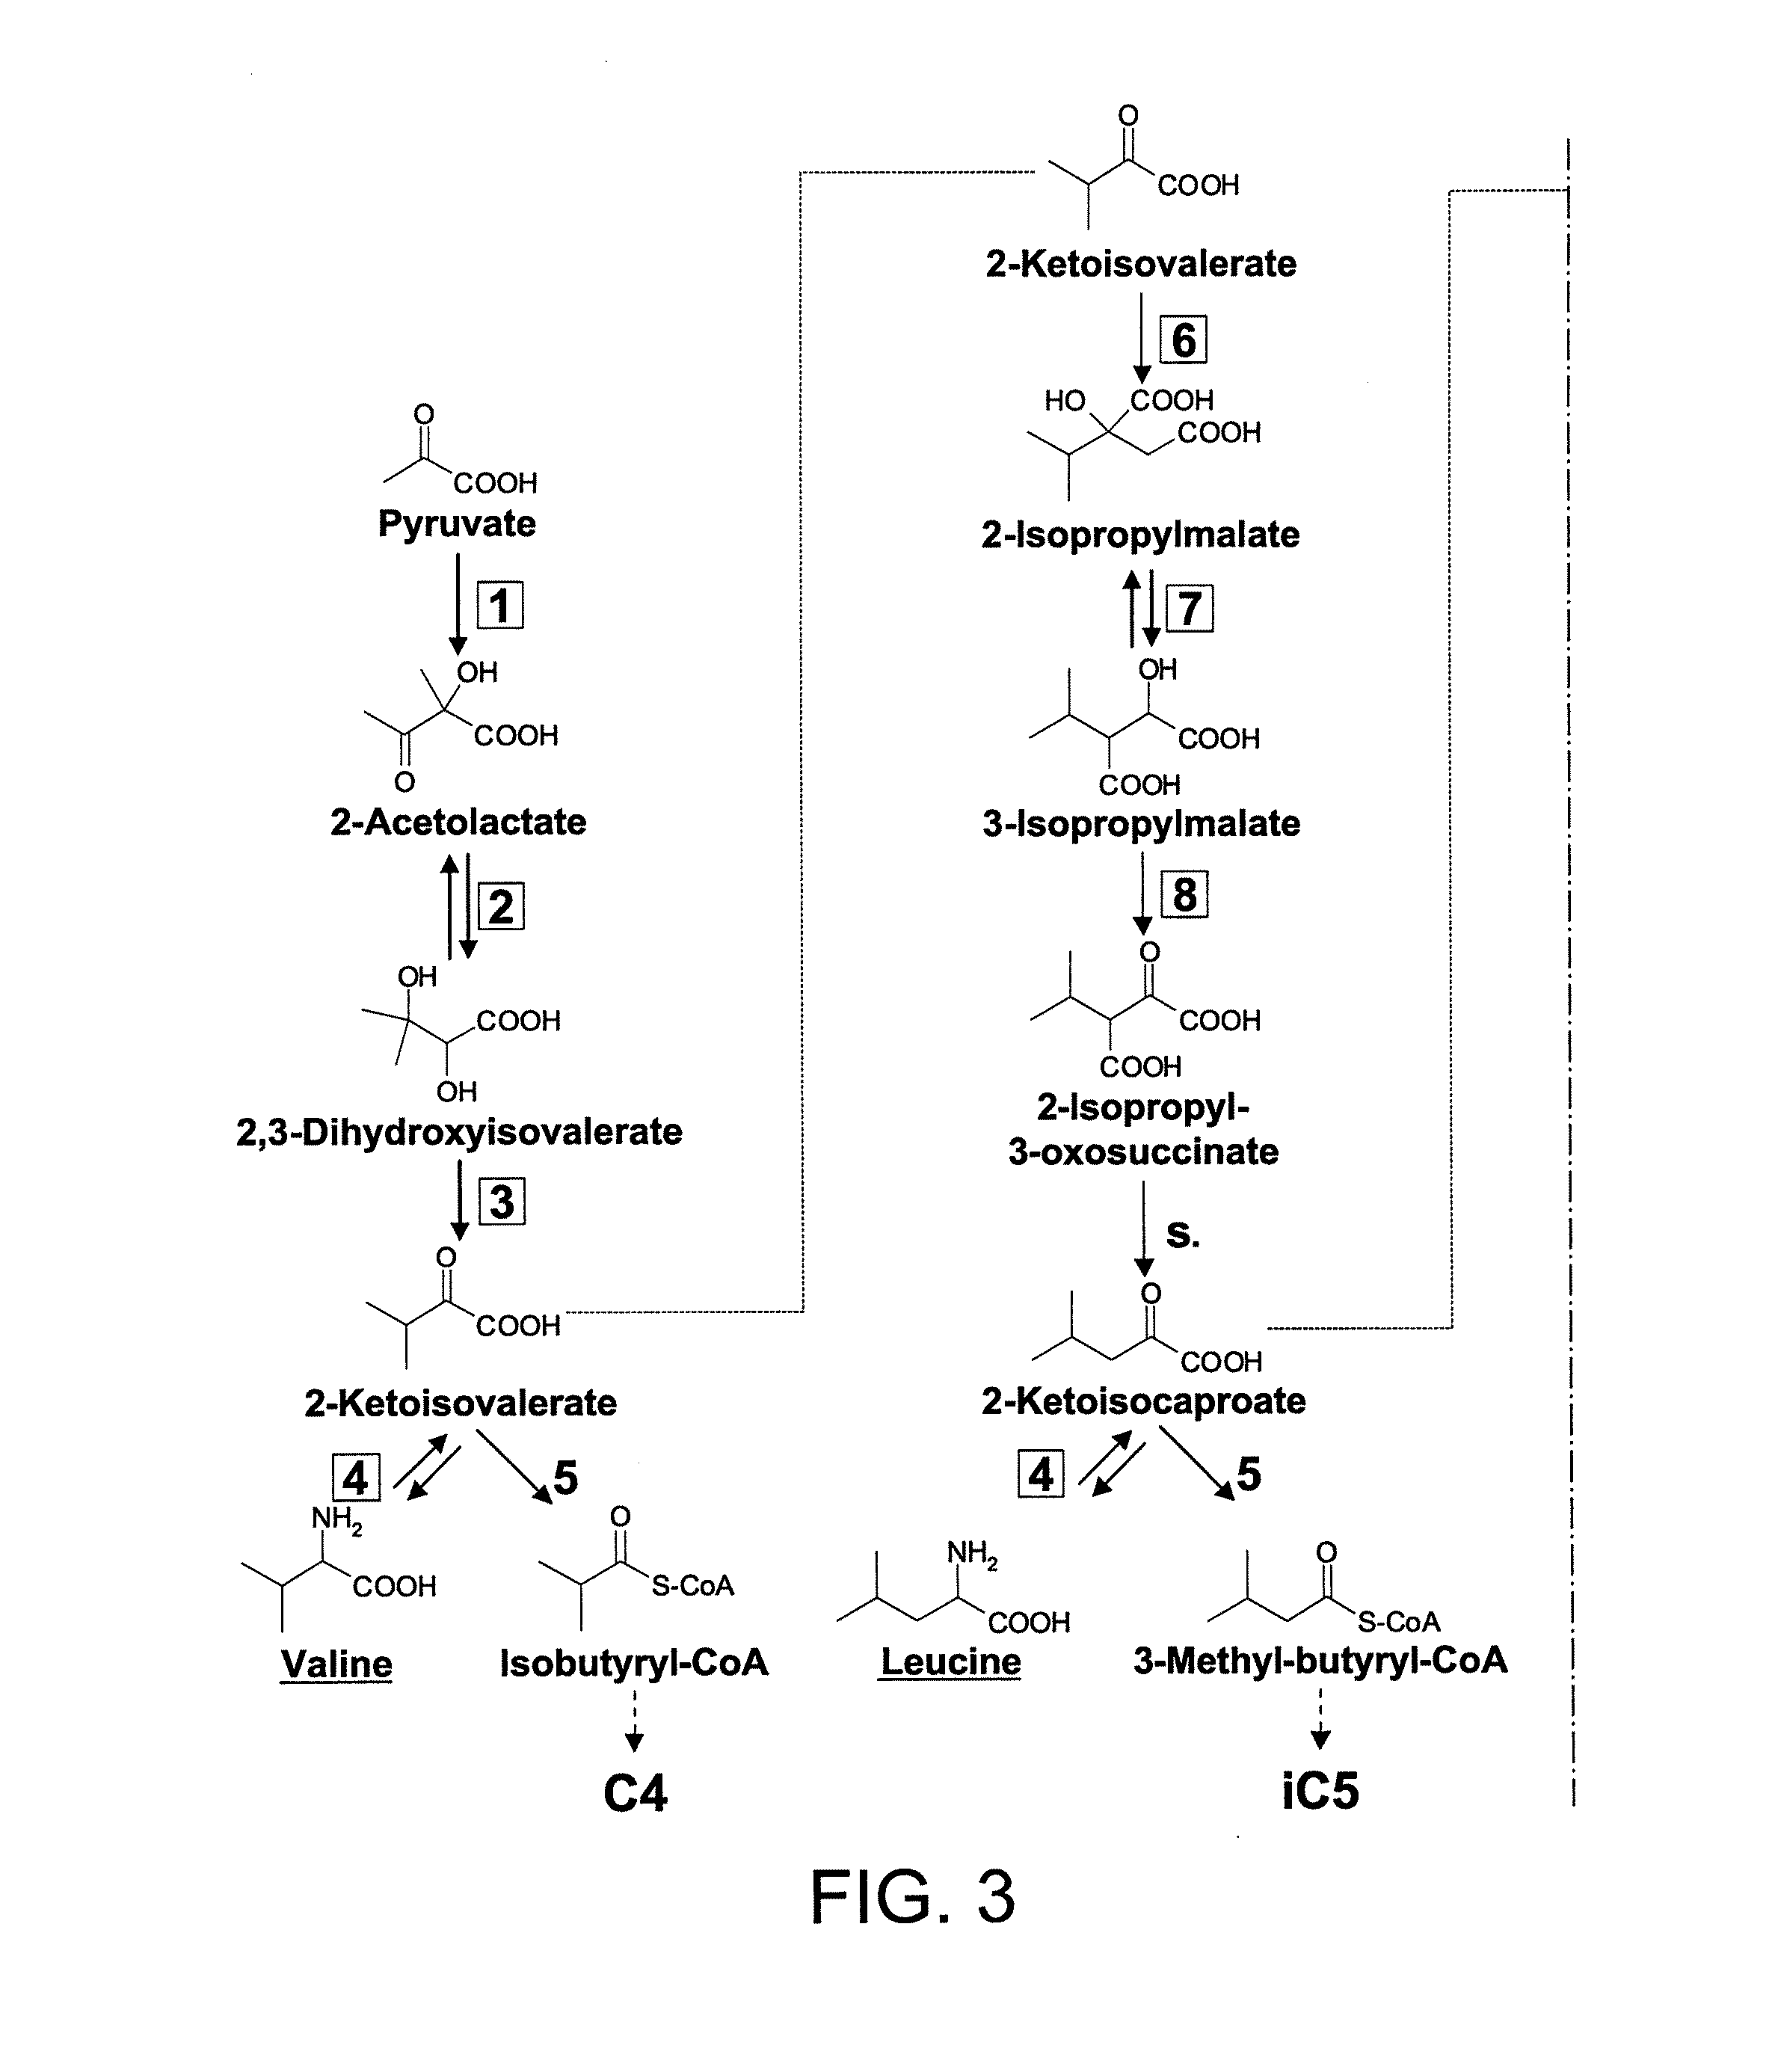 Isopropylmalate synthase from nicotiana tabacum and methods and uses thereof